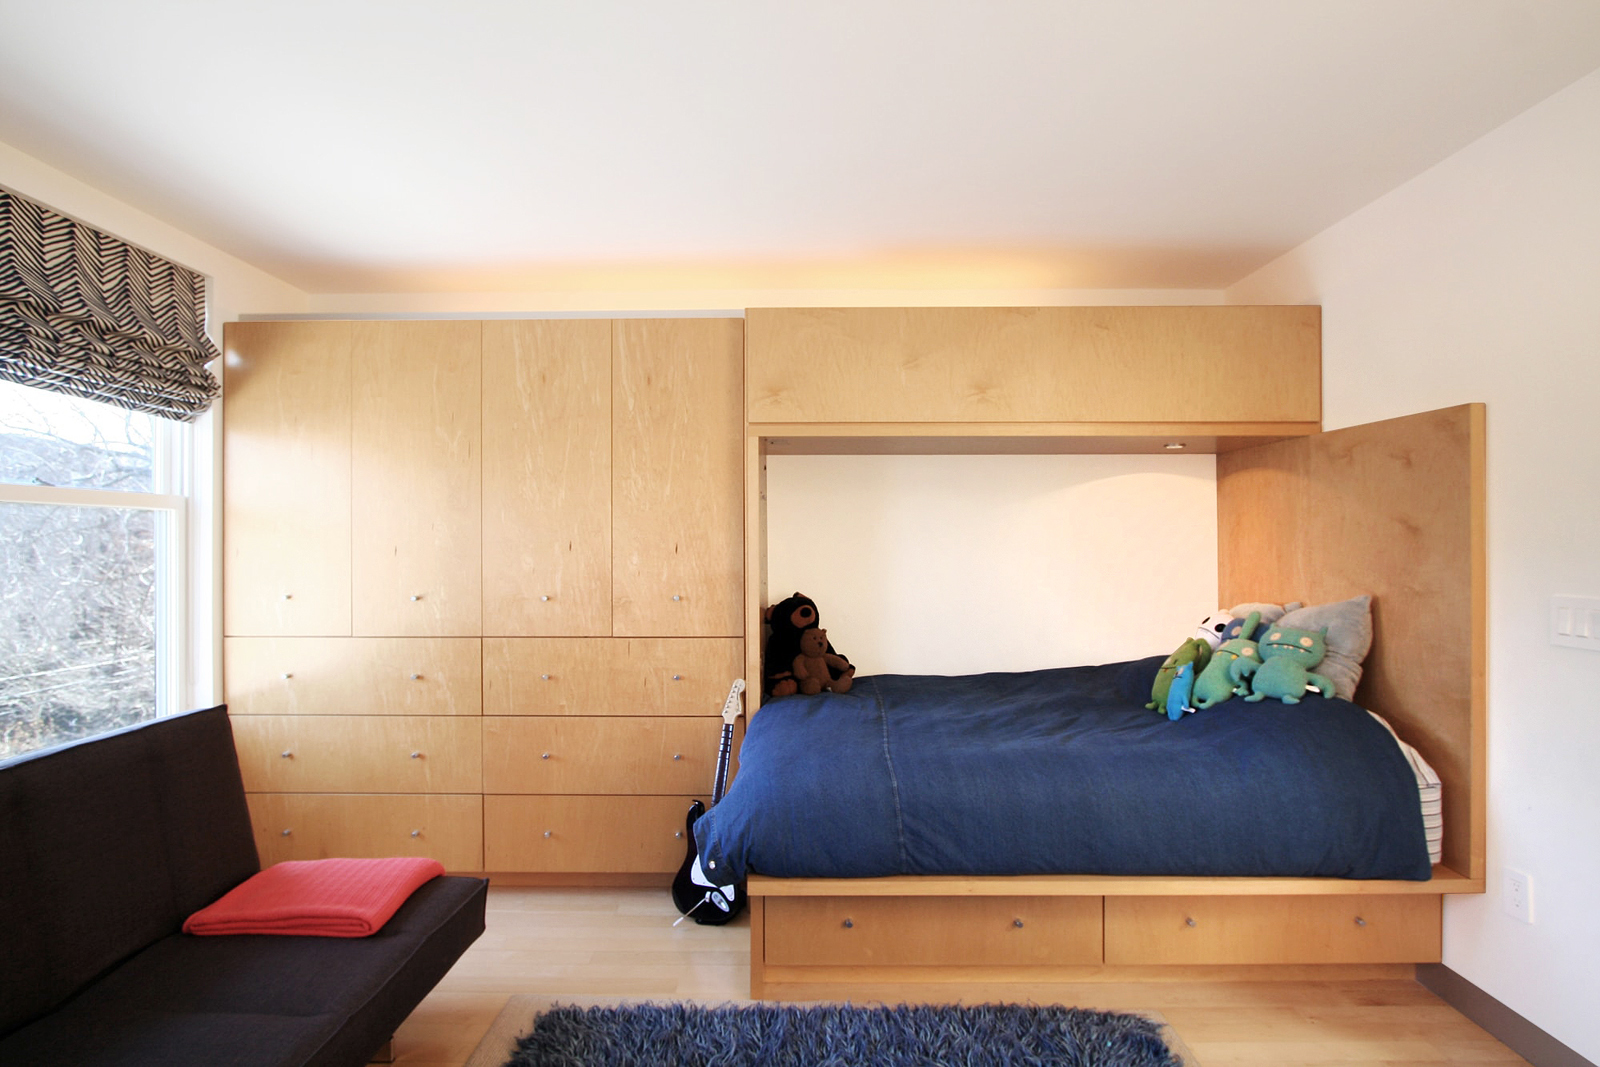 12-res4-resolution-4-architecture-modern-townhouse-residential-ewan-townhouse-interior-boys-bed-room.jpg